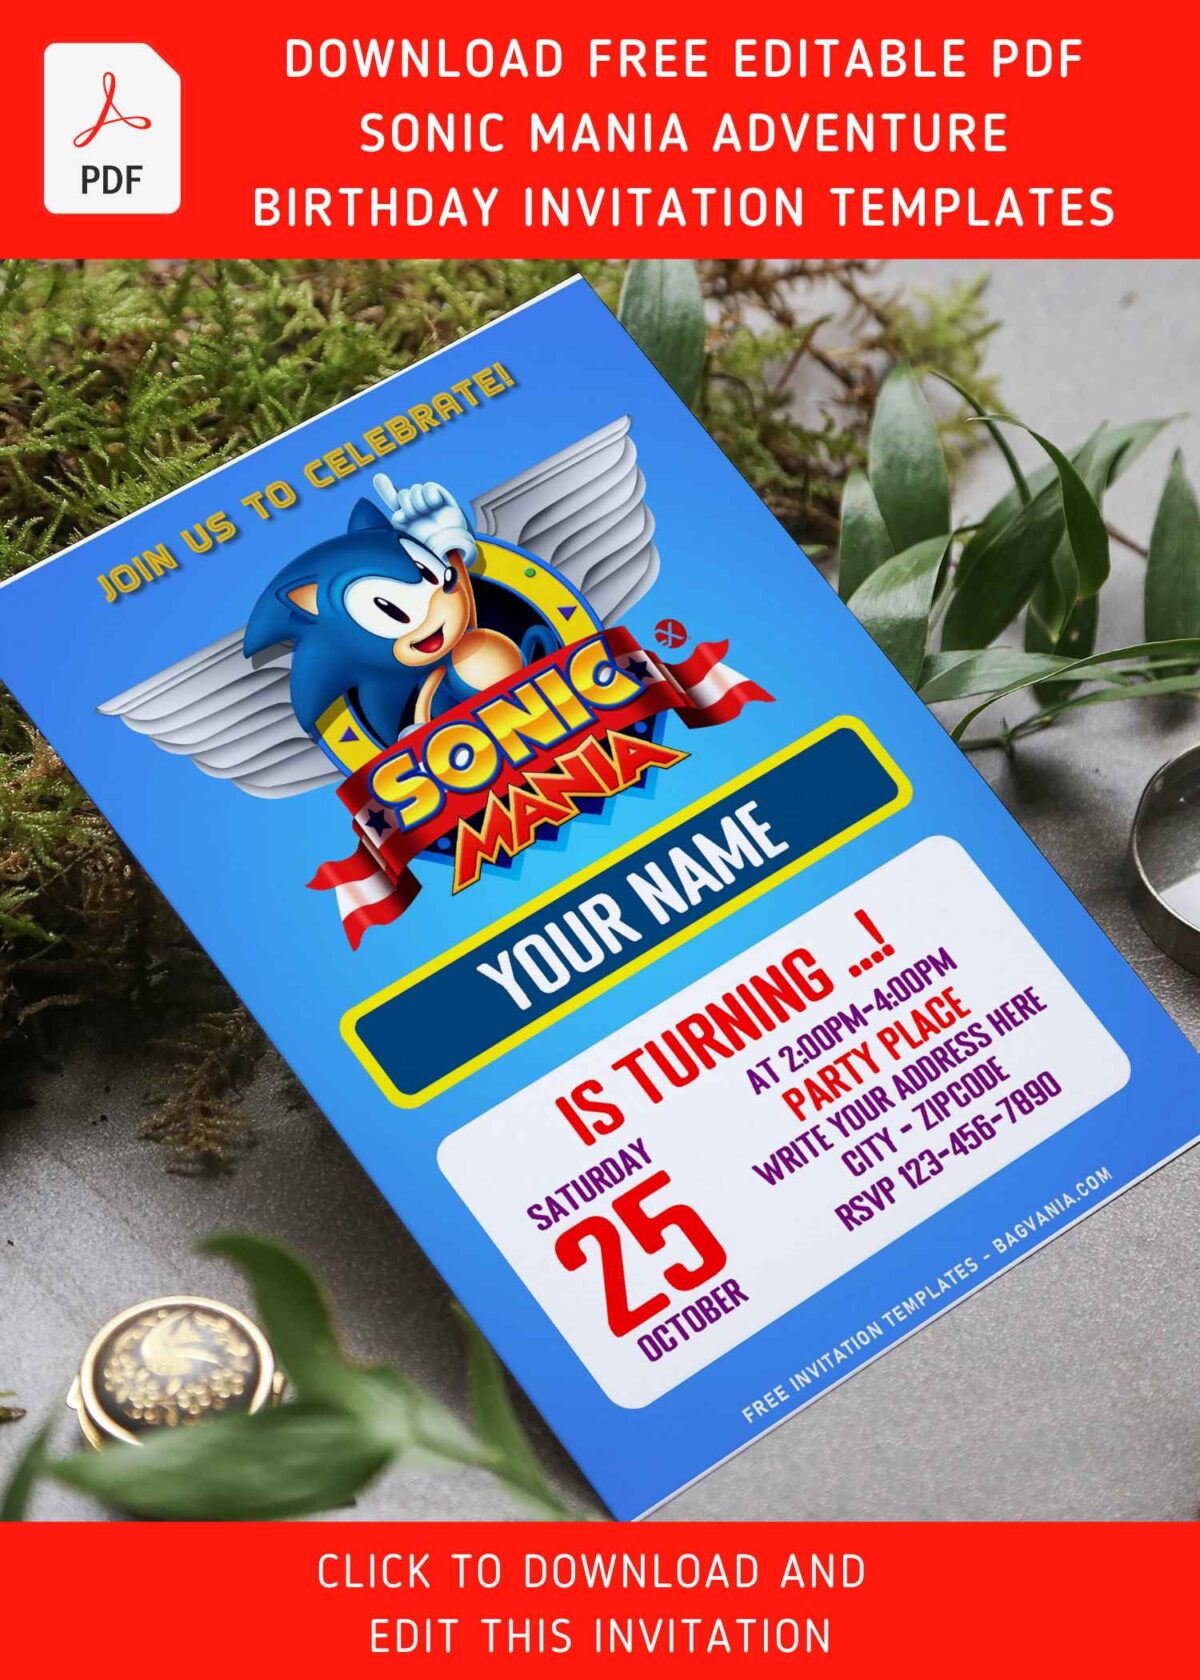 (Free Editable PDF) Super Cool Classic Sonic The Hedgehog Birthday Invitation Templates with adorable name box